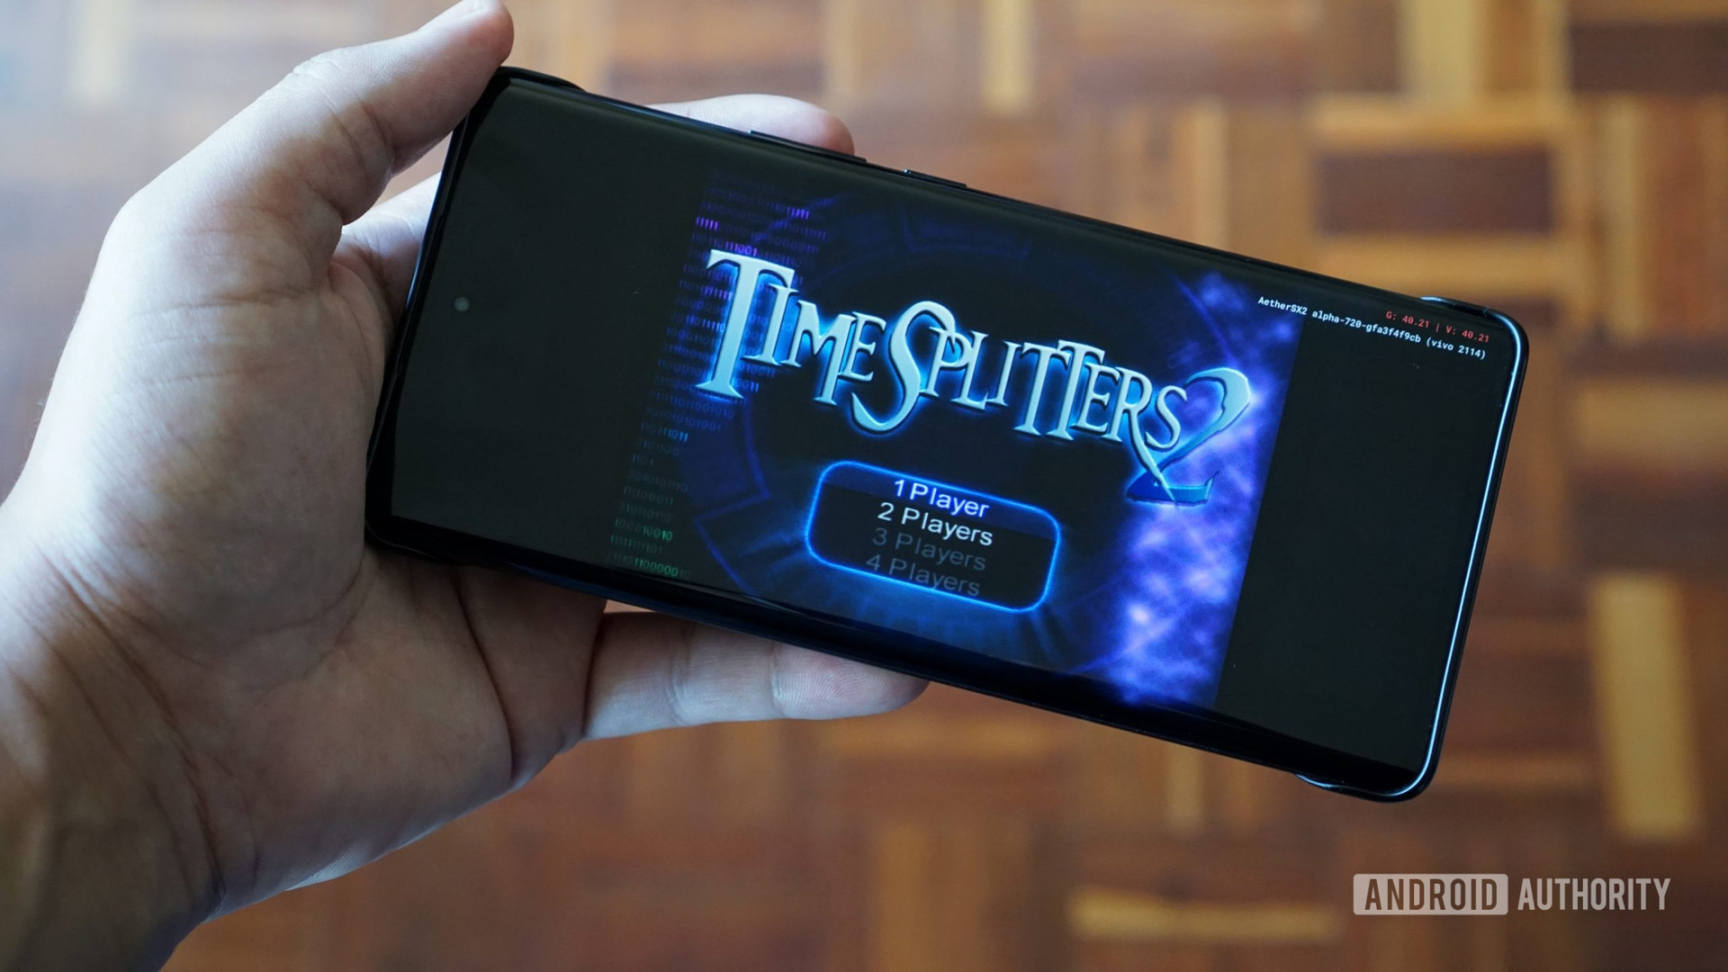 emulator ps2 di android: AetherSX guide: The best PS emulator for Android - Android Authority